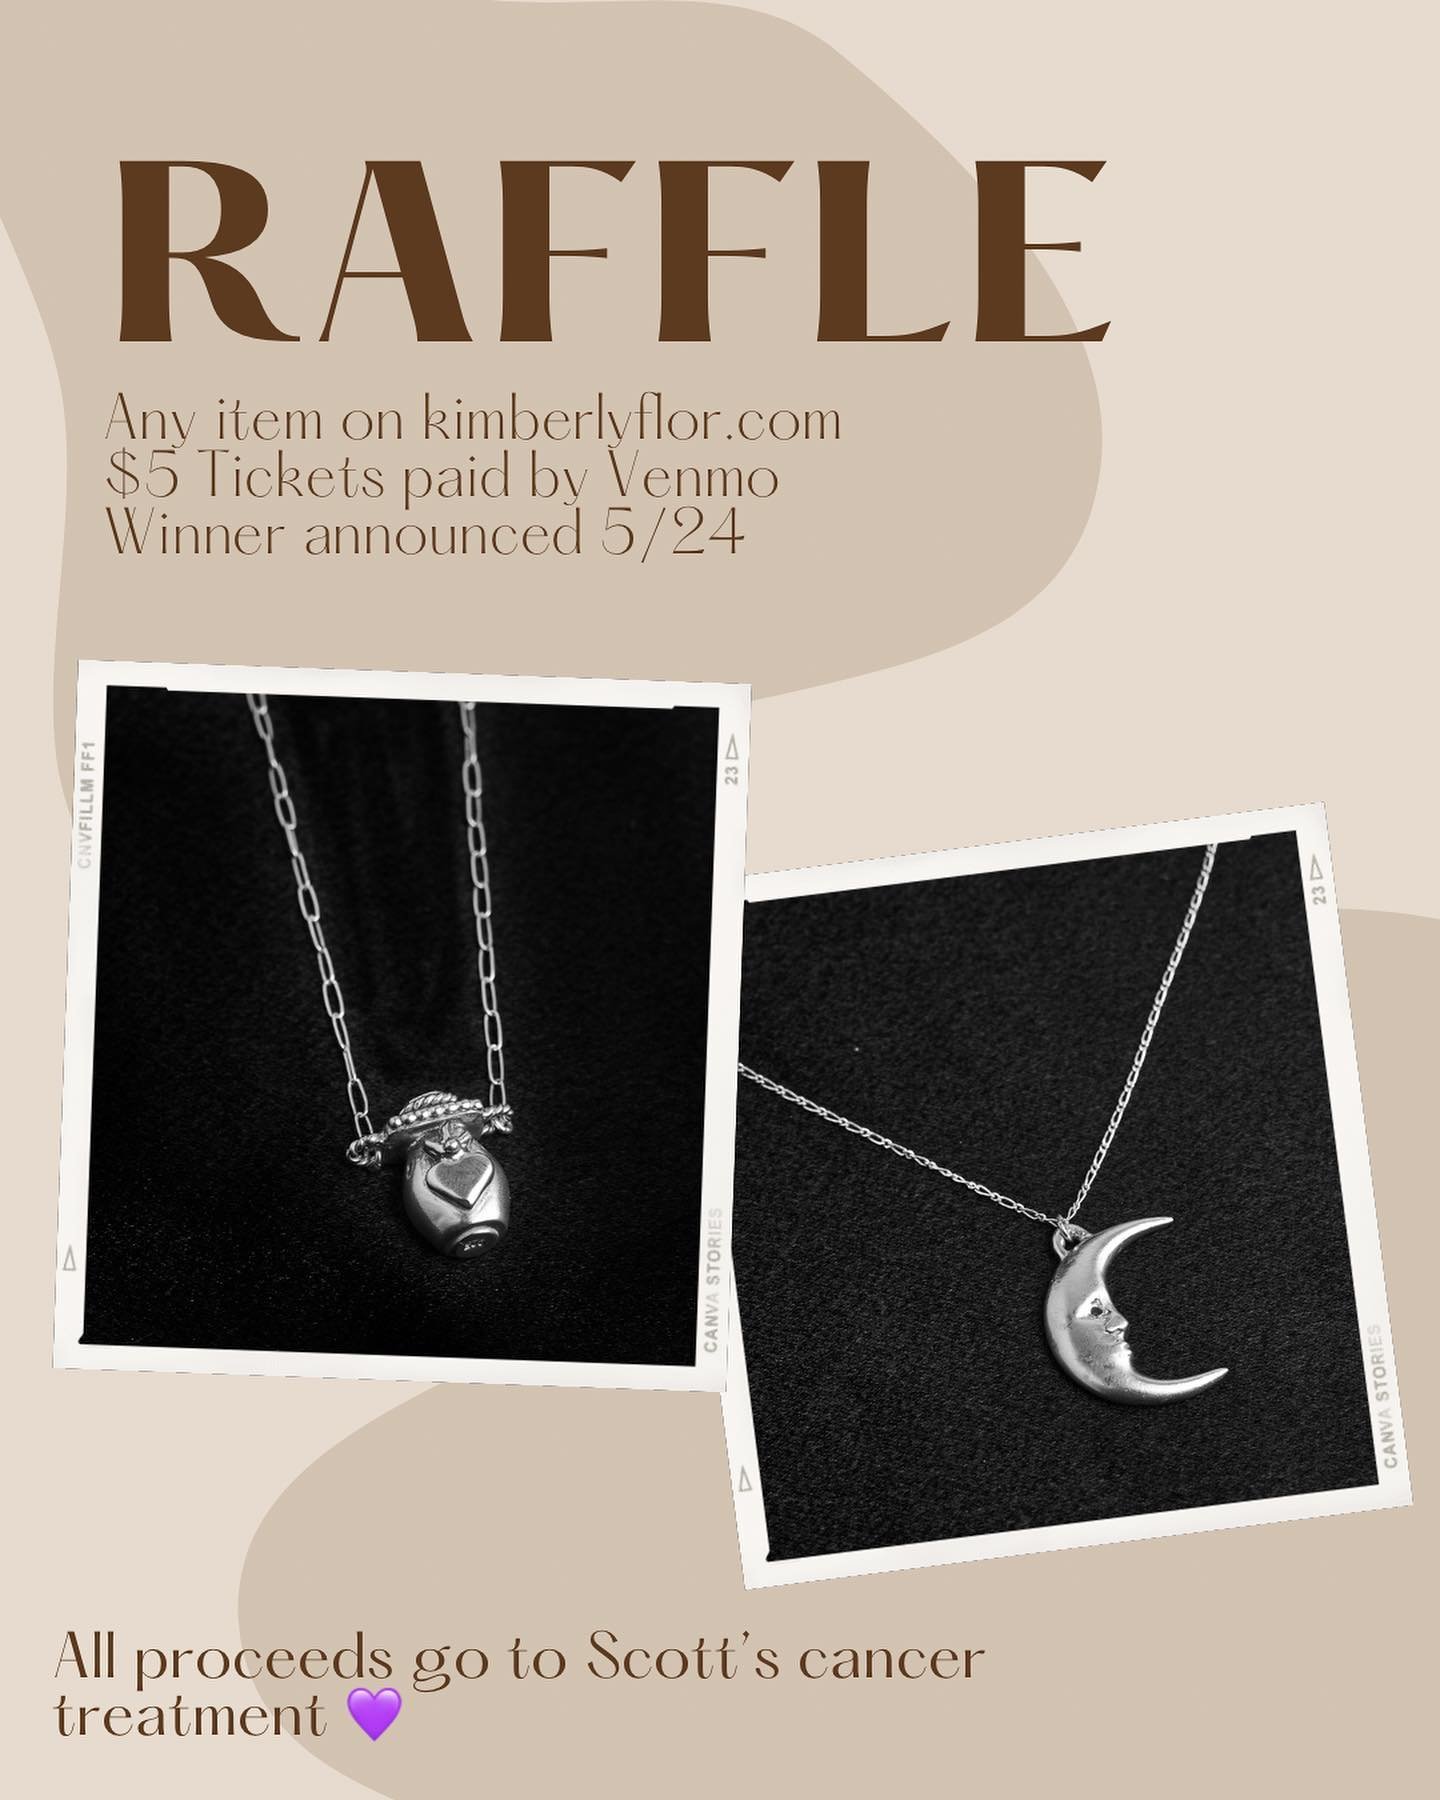 RAFFLE for any item at kimberlyflor.com, winner&rsquo;s choice ❤️ 100% of the funds received go towards helping my sweet friend battle cancer. $5-$10 sliding scale raffle tickets paid to the Venmo on the second slide with the subject &ldquo;RAFFLE&rd